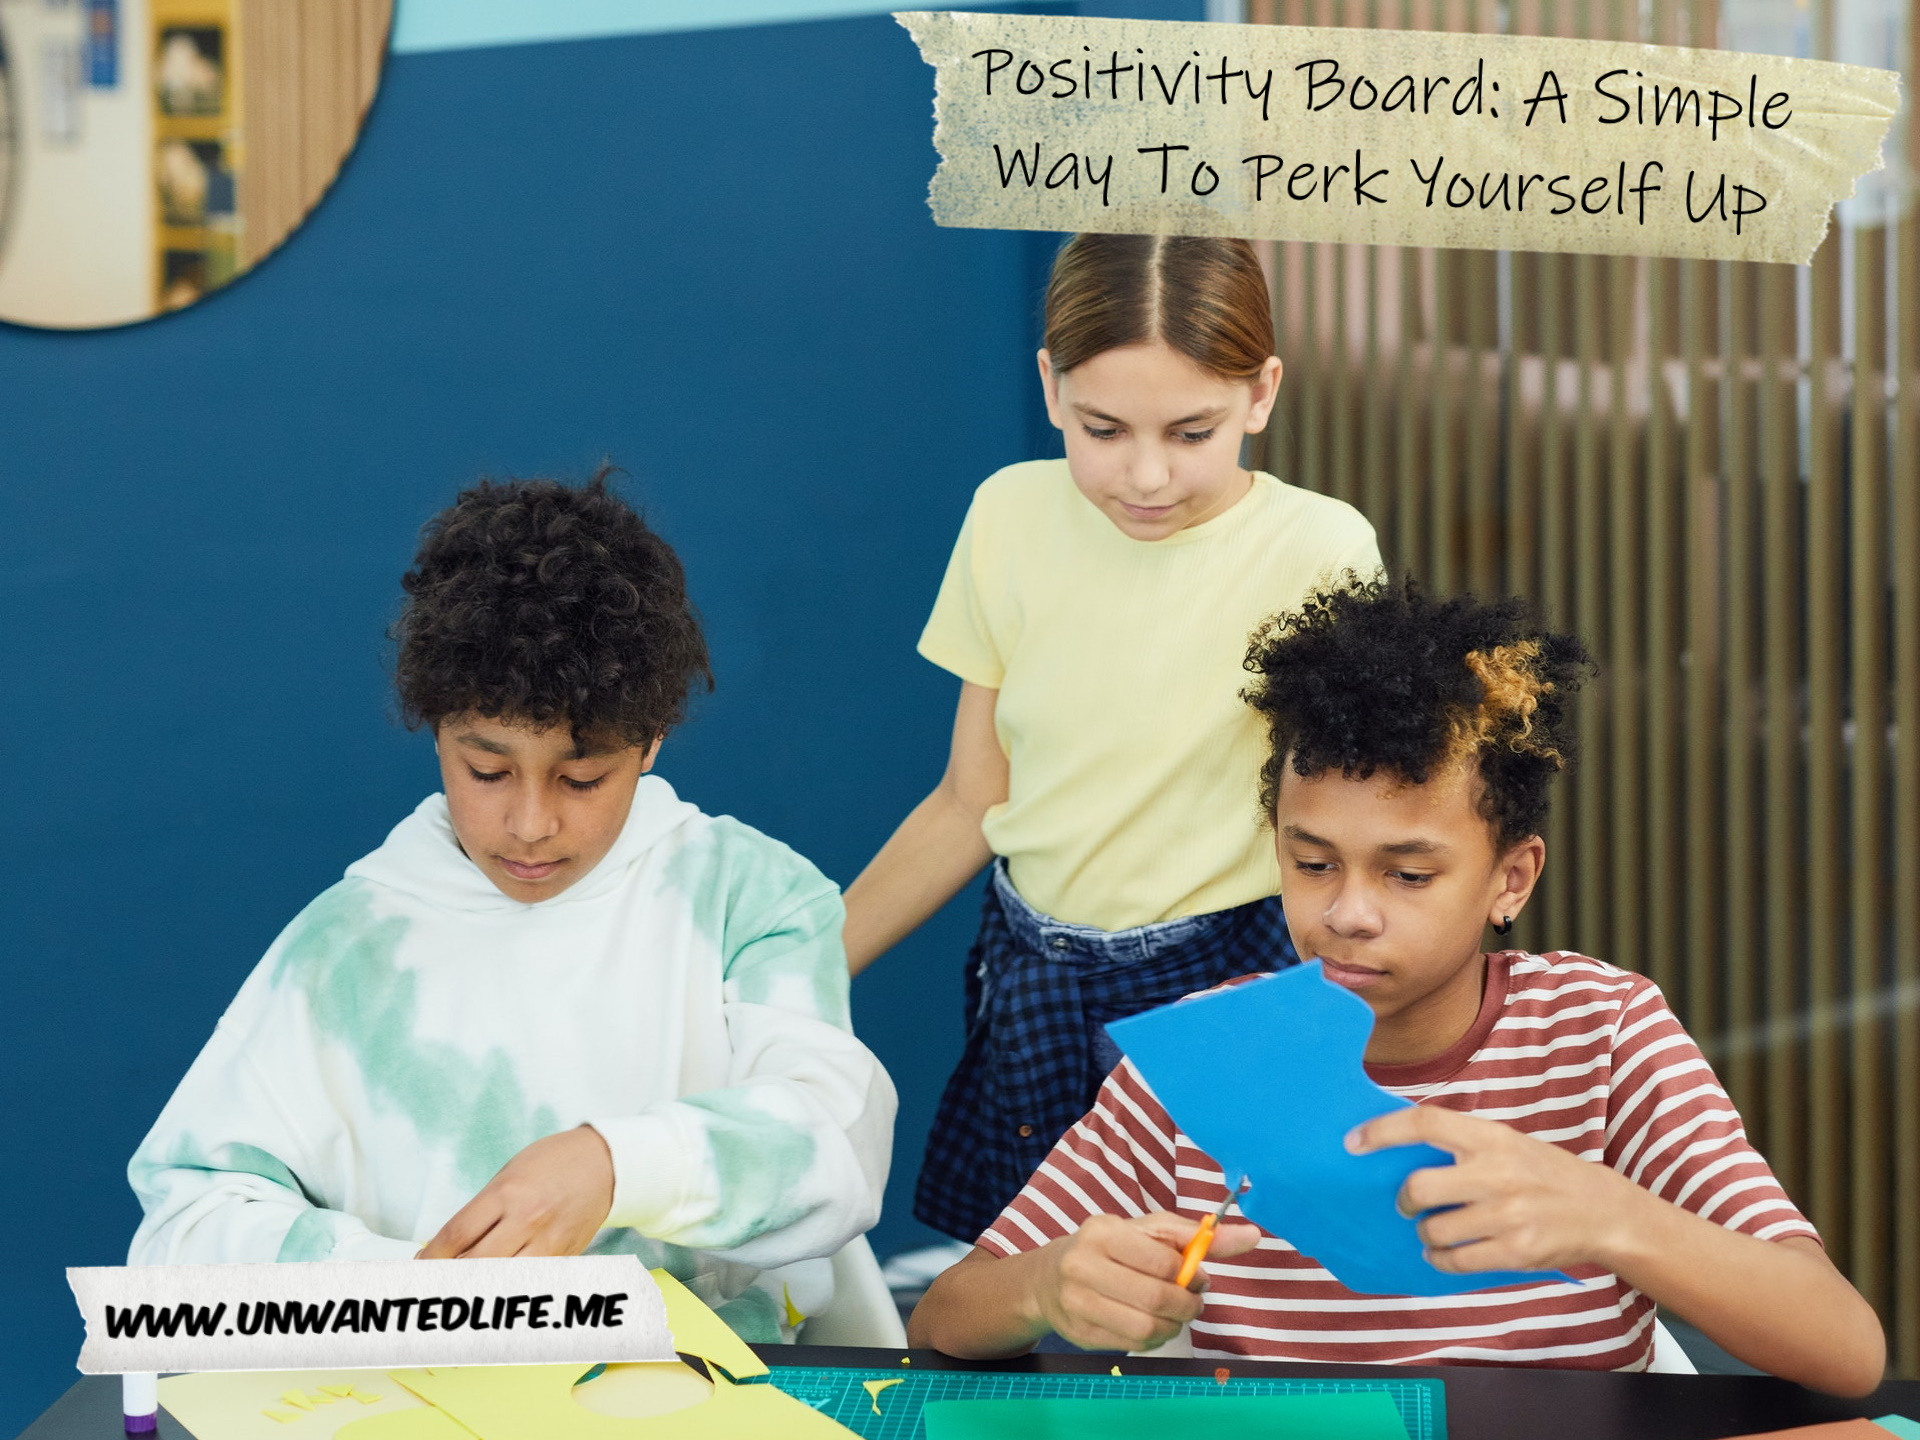 A photo of three children from different ethnic groups that are engaged in a crafting activity to represent the topic of the article - Positivity Board: A Simple Way To Perk Yourself Up